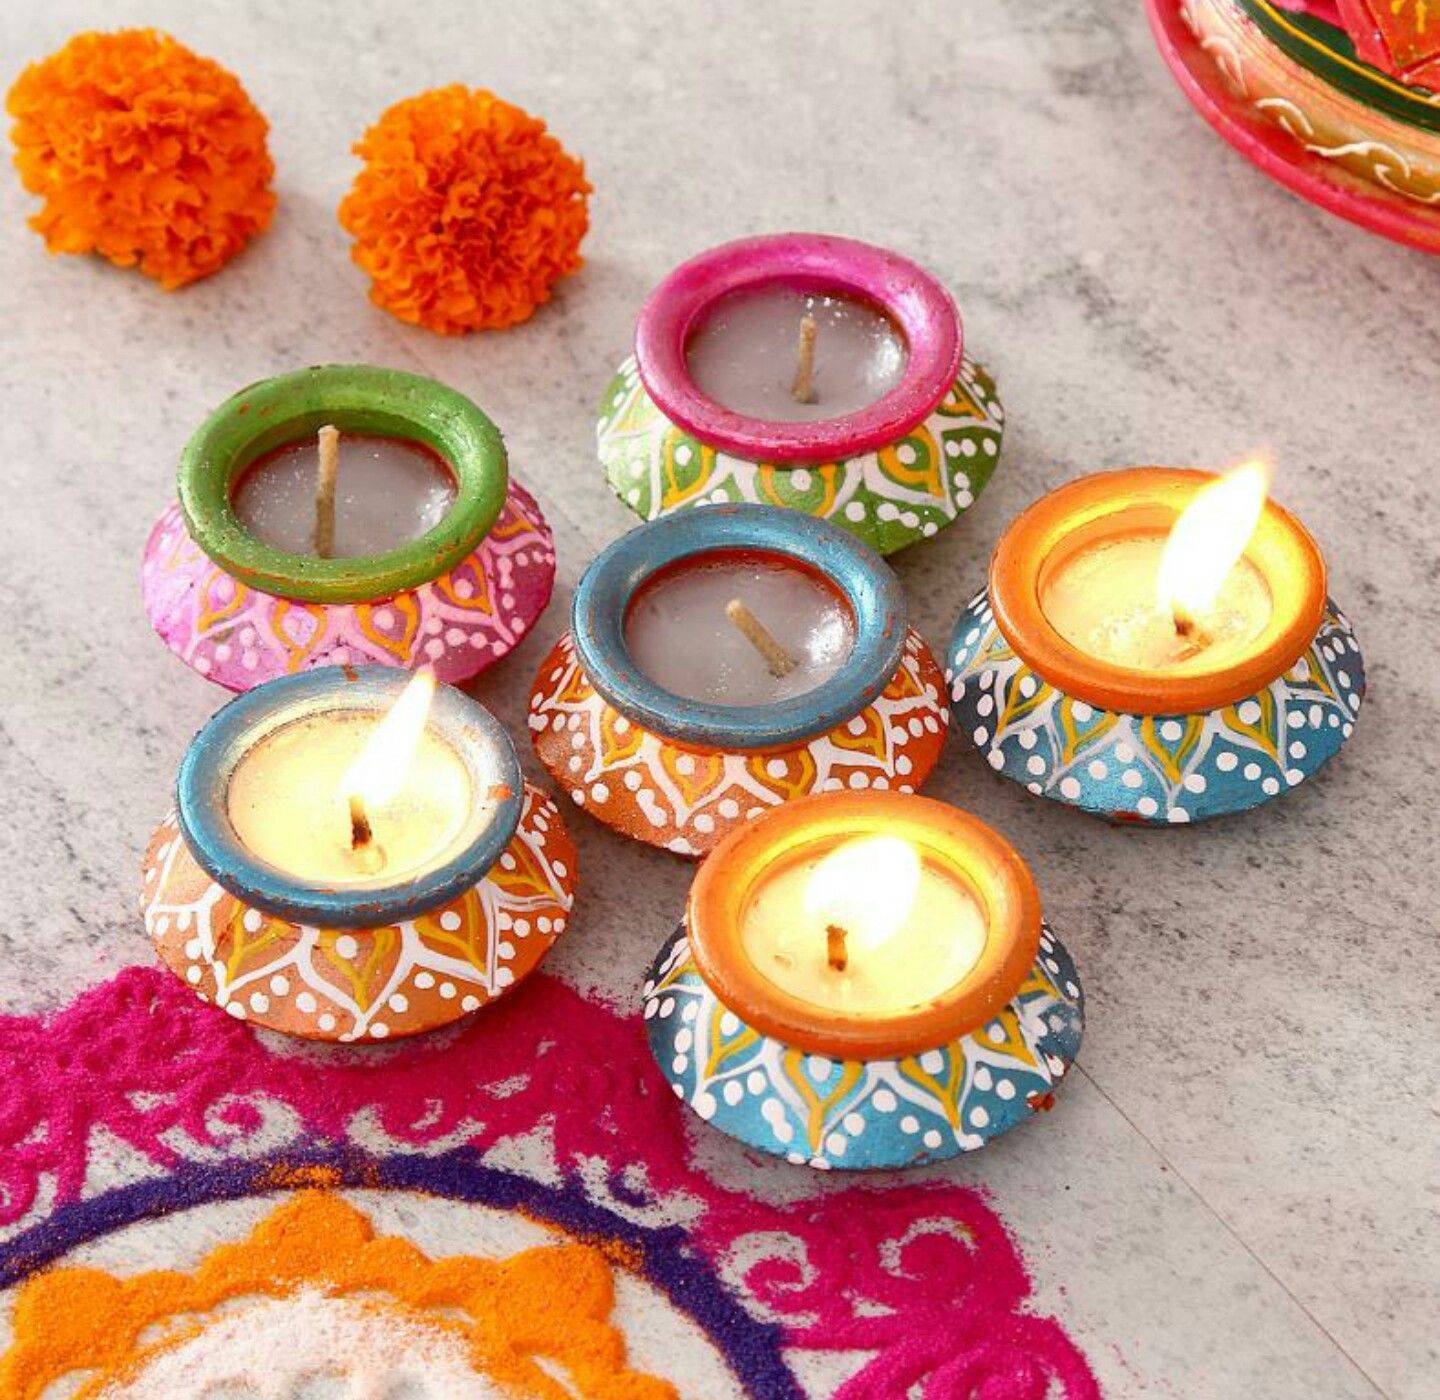 From torans to the good old diya: Diwali decoration ideas to brighten up  your space | Life-style News - The Indian Express